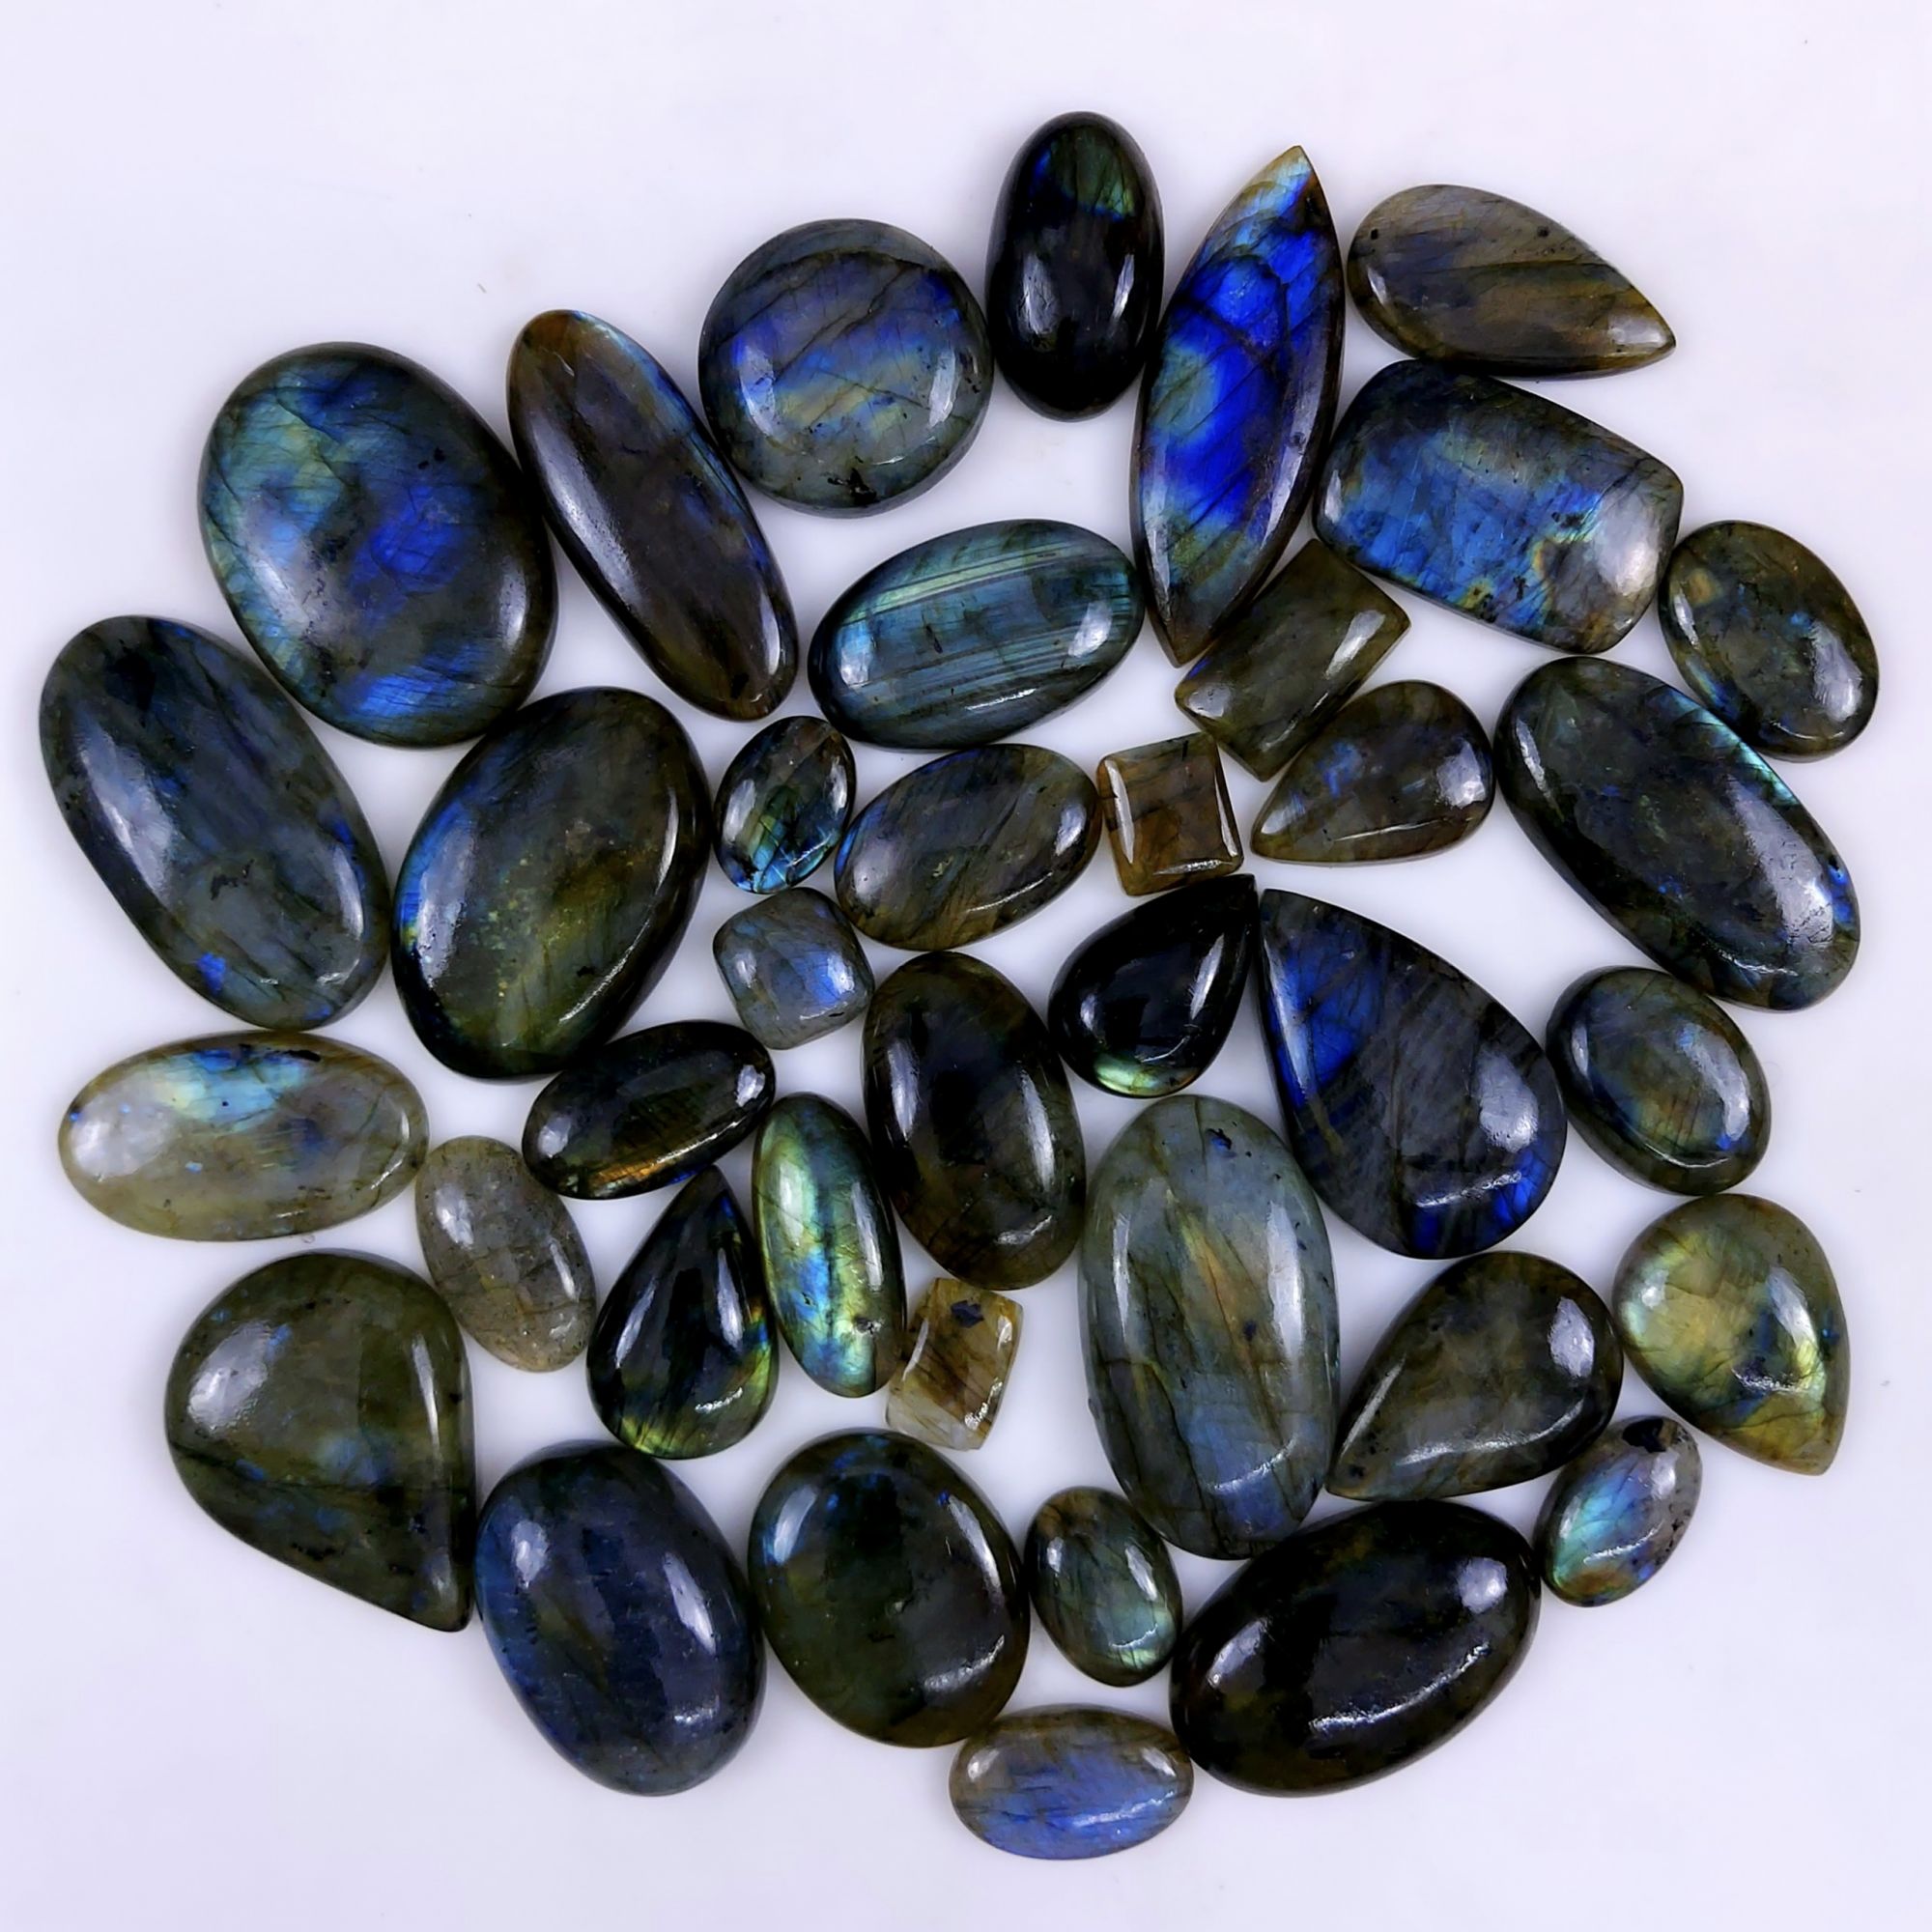 38pc 1676Cts Labradorite Cabochon Multifire Healing Crystal For Jewelry Supplies, Labradorite Necklace Handmade Wire Wrapped Gemstone Pendant 47x27 12x9mm#6322